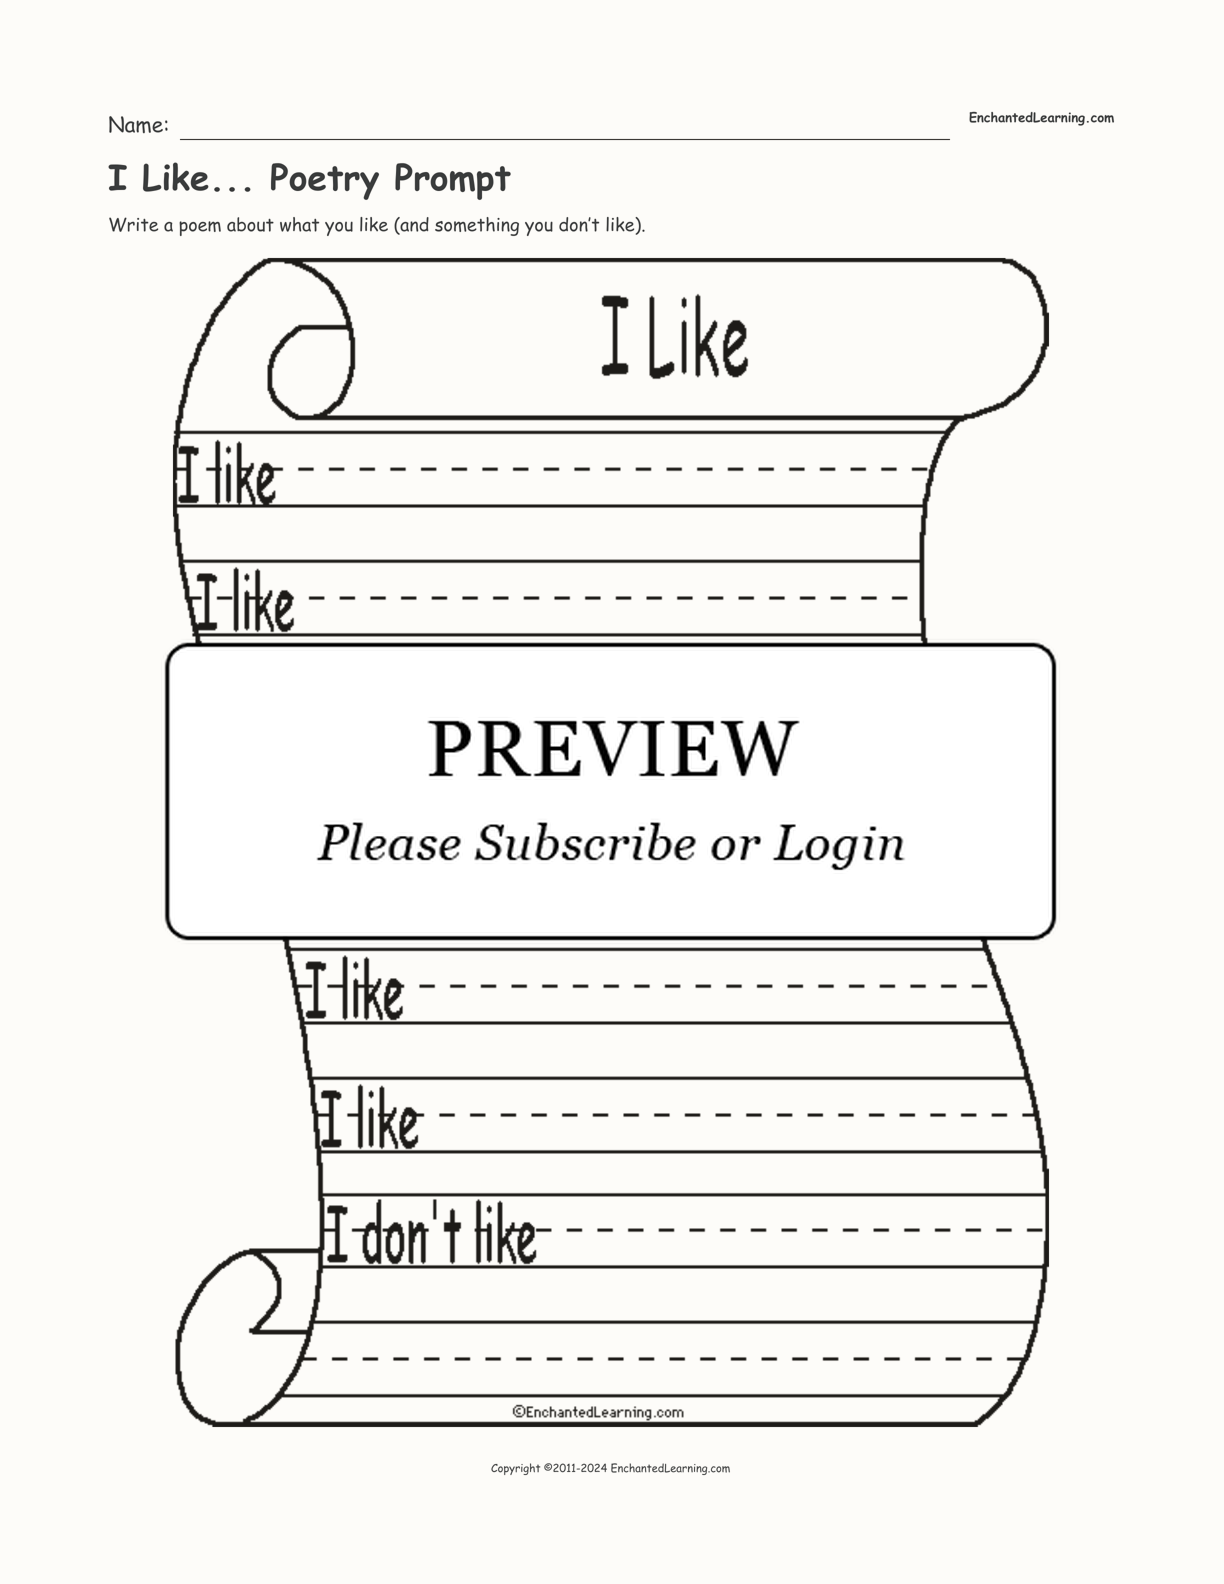 I Like... Poetry Prompt interactive worksheet page 1